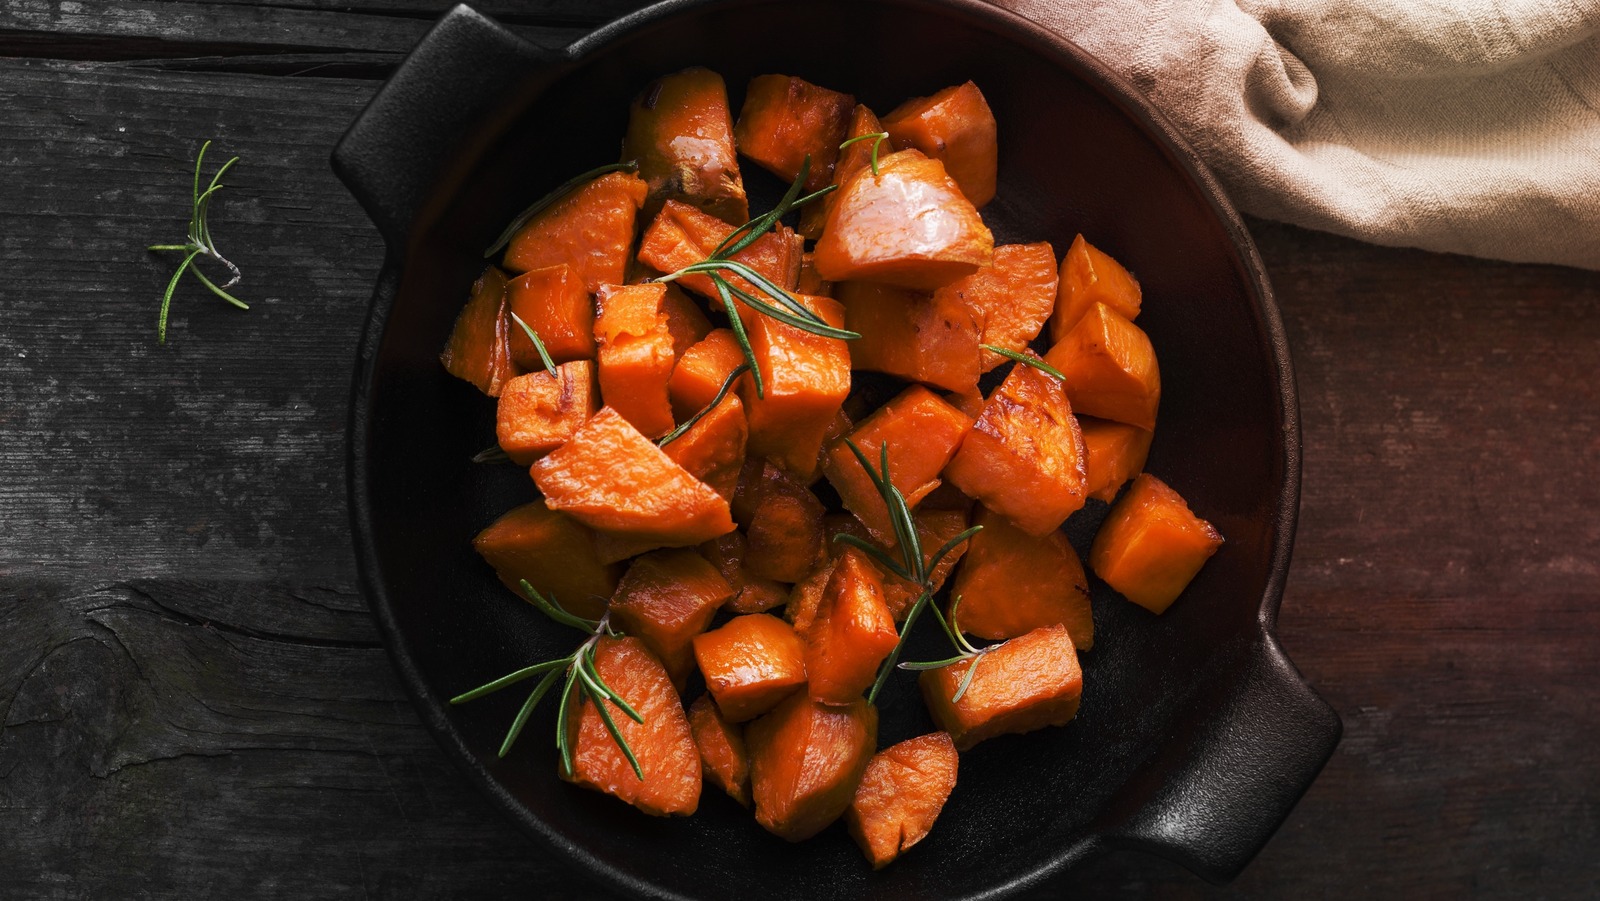 Braise Sweet Potatoes In Milk For A Tender, Silky Result